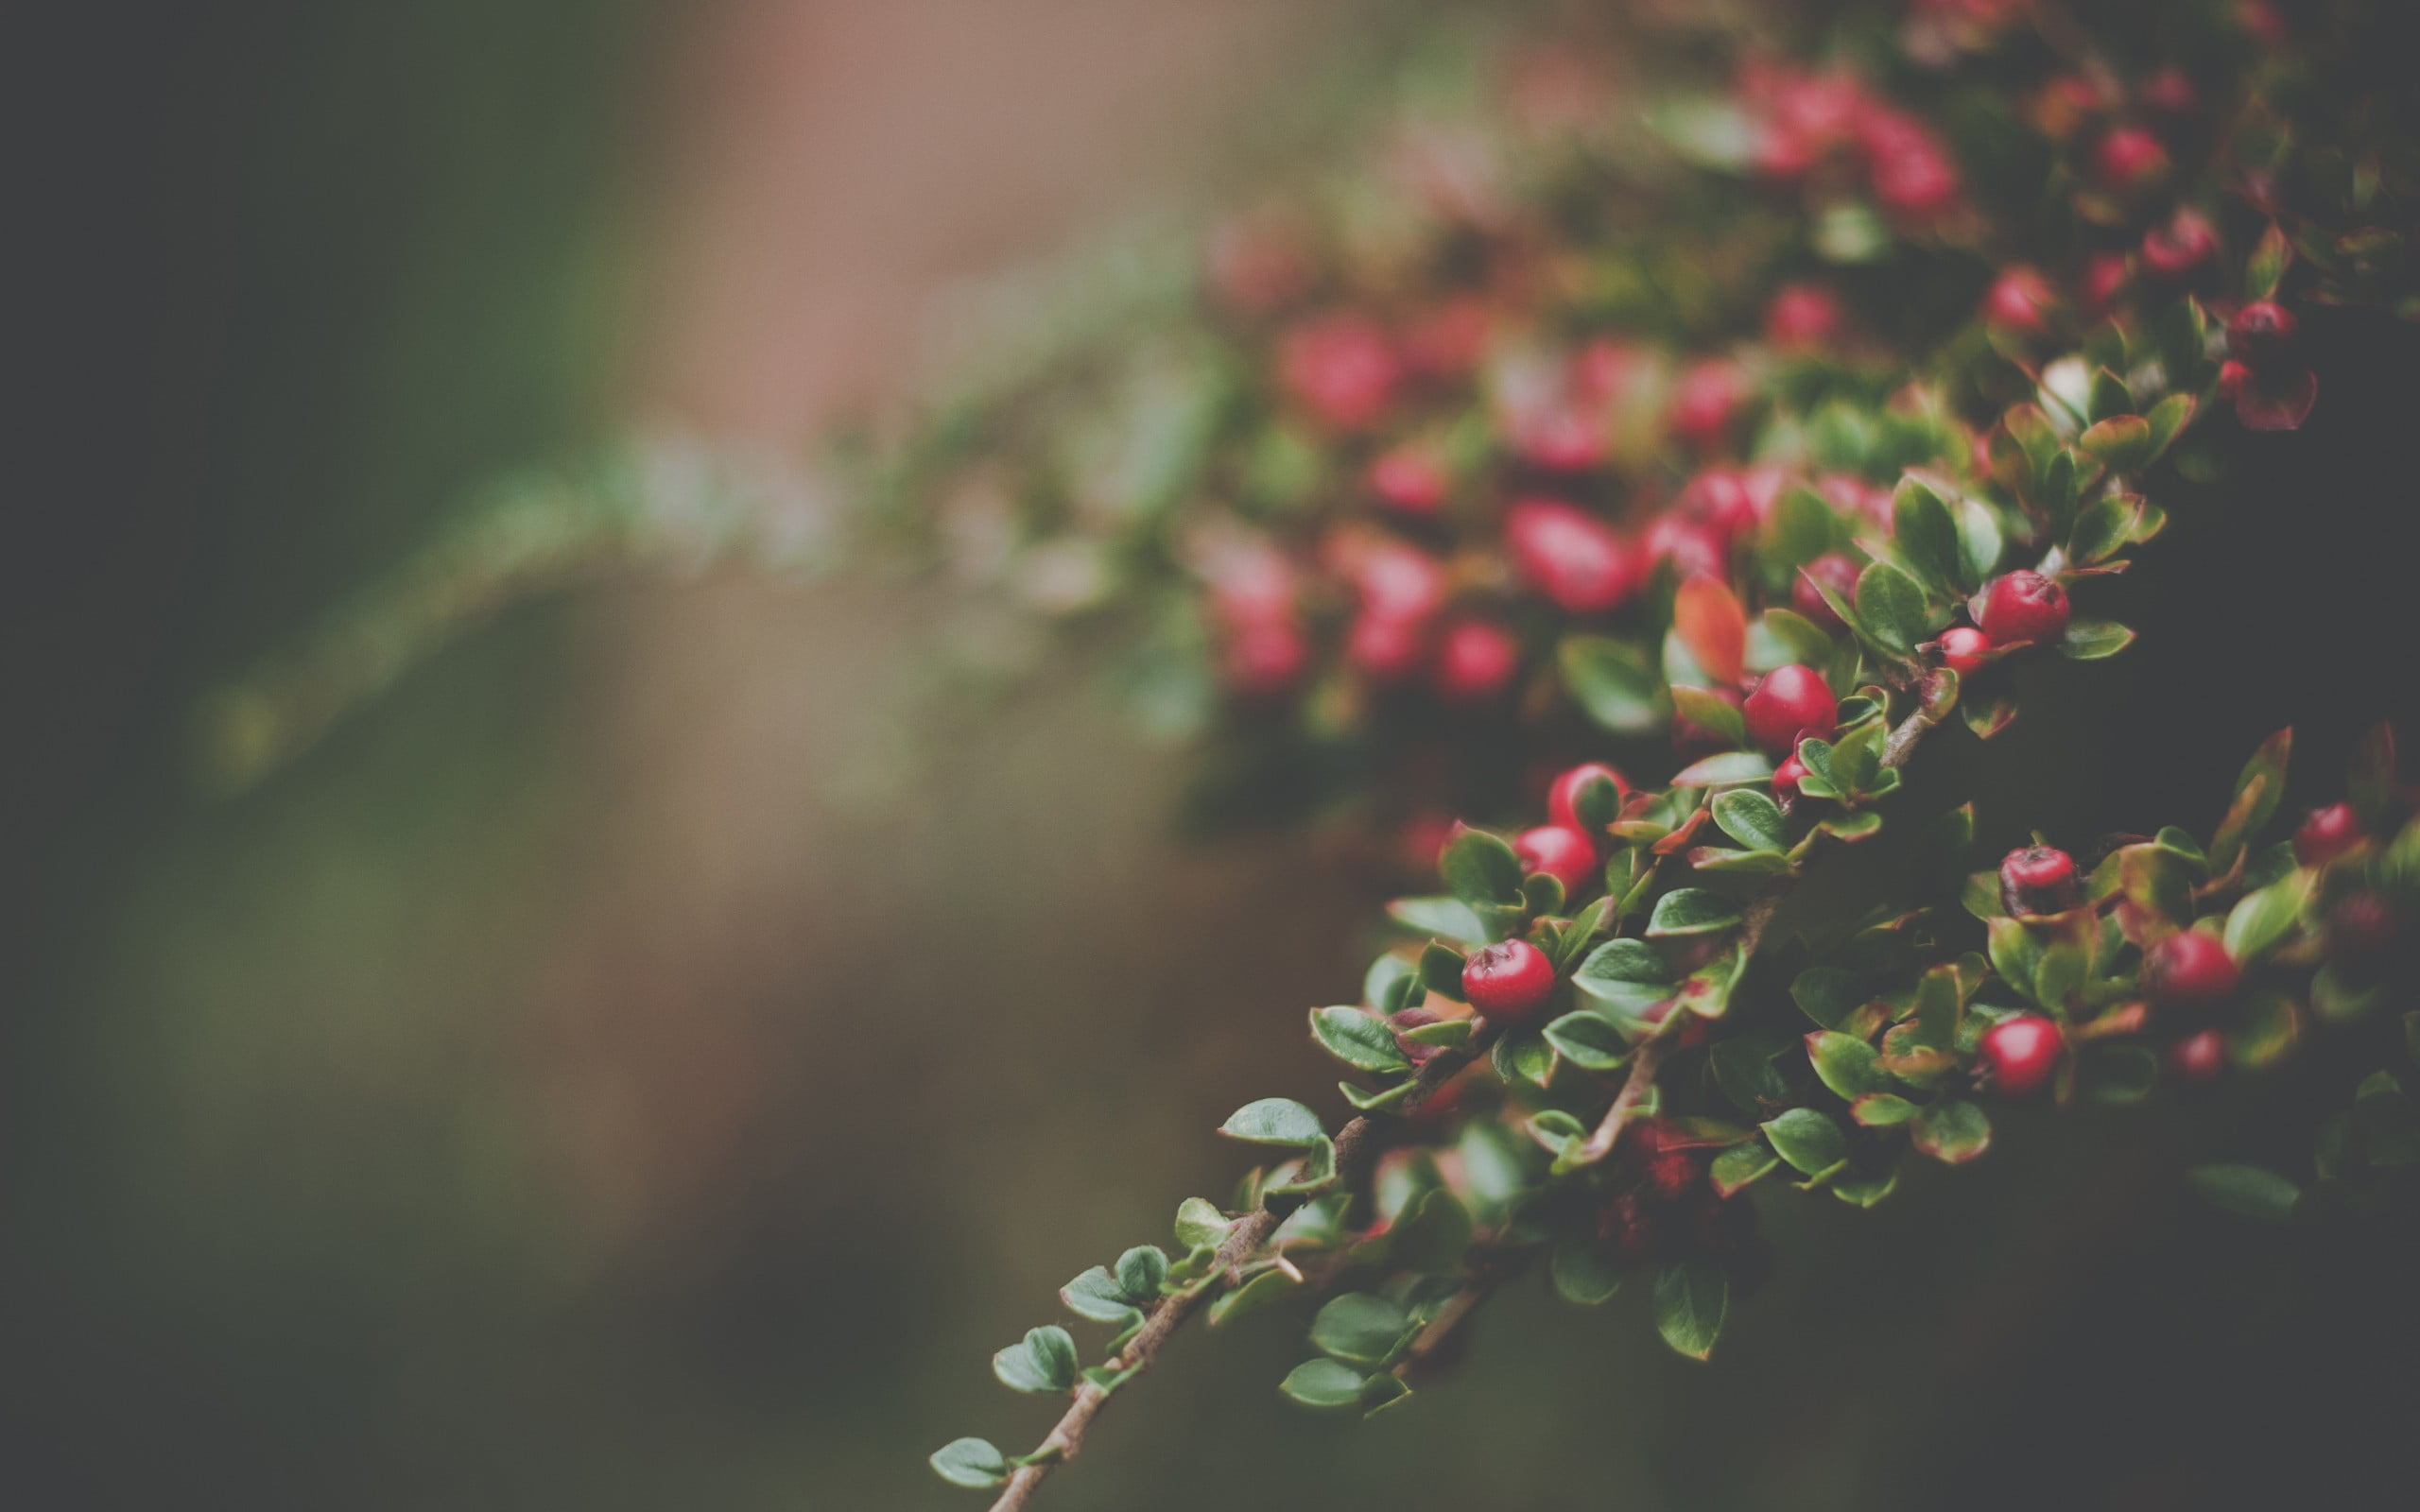 shallow focus photography of red berries